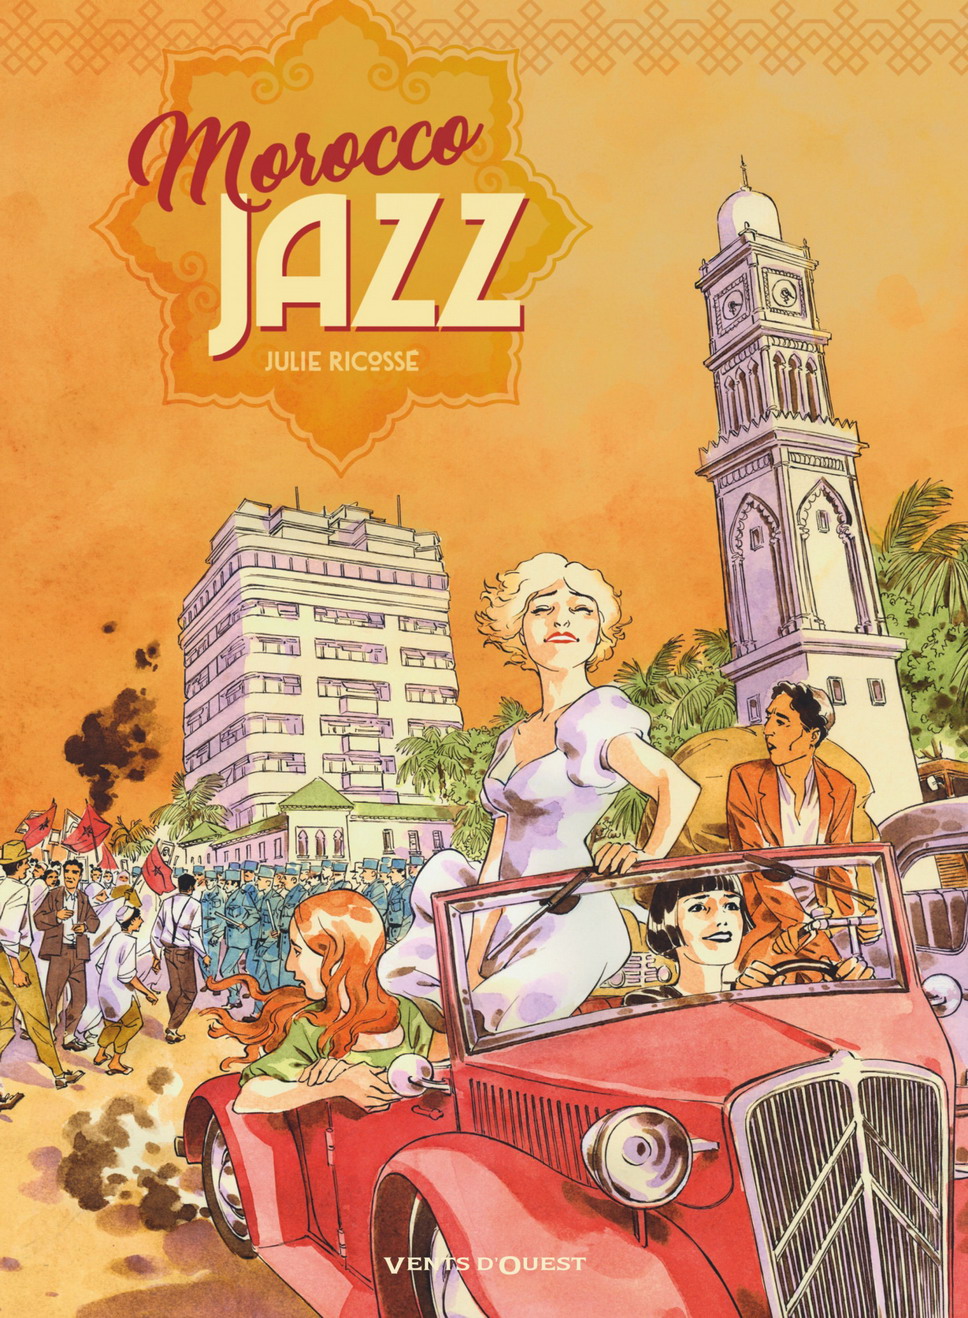 Couverture BD Morocco Jazz